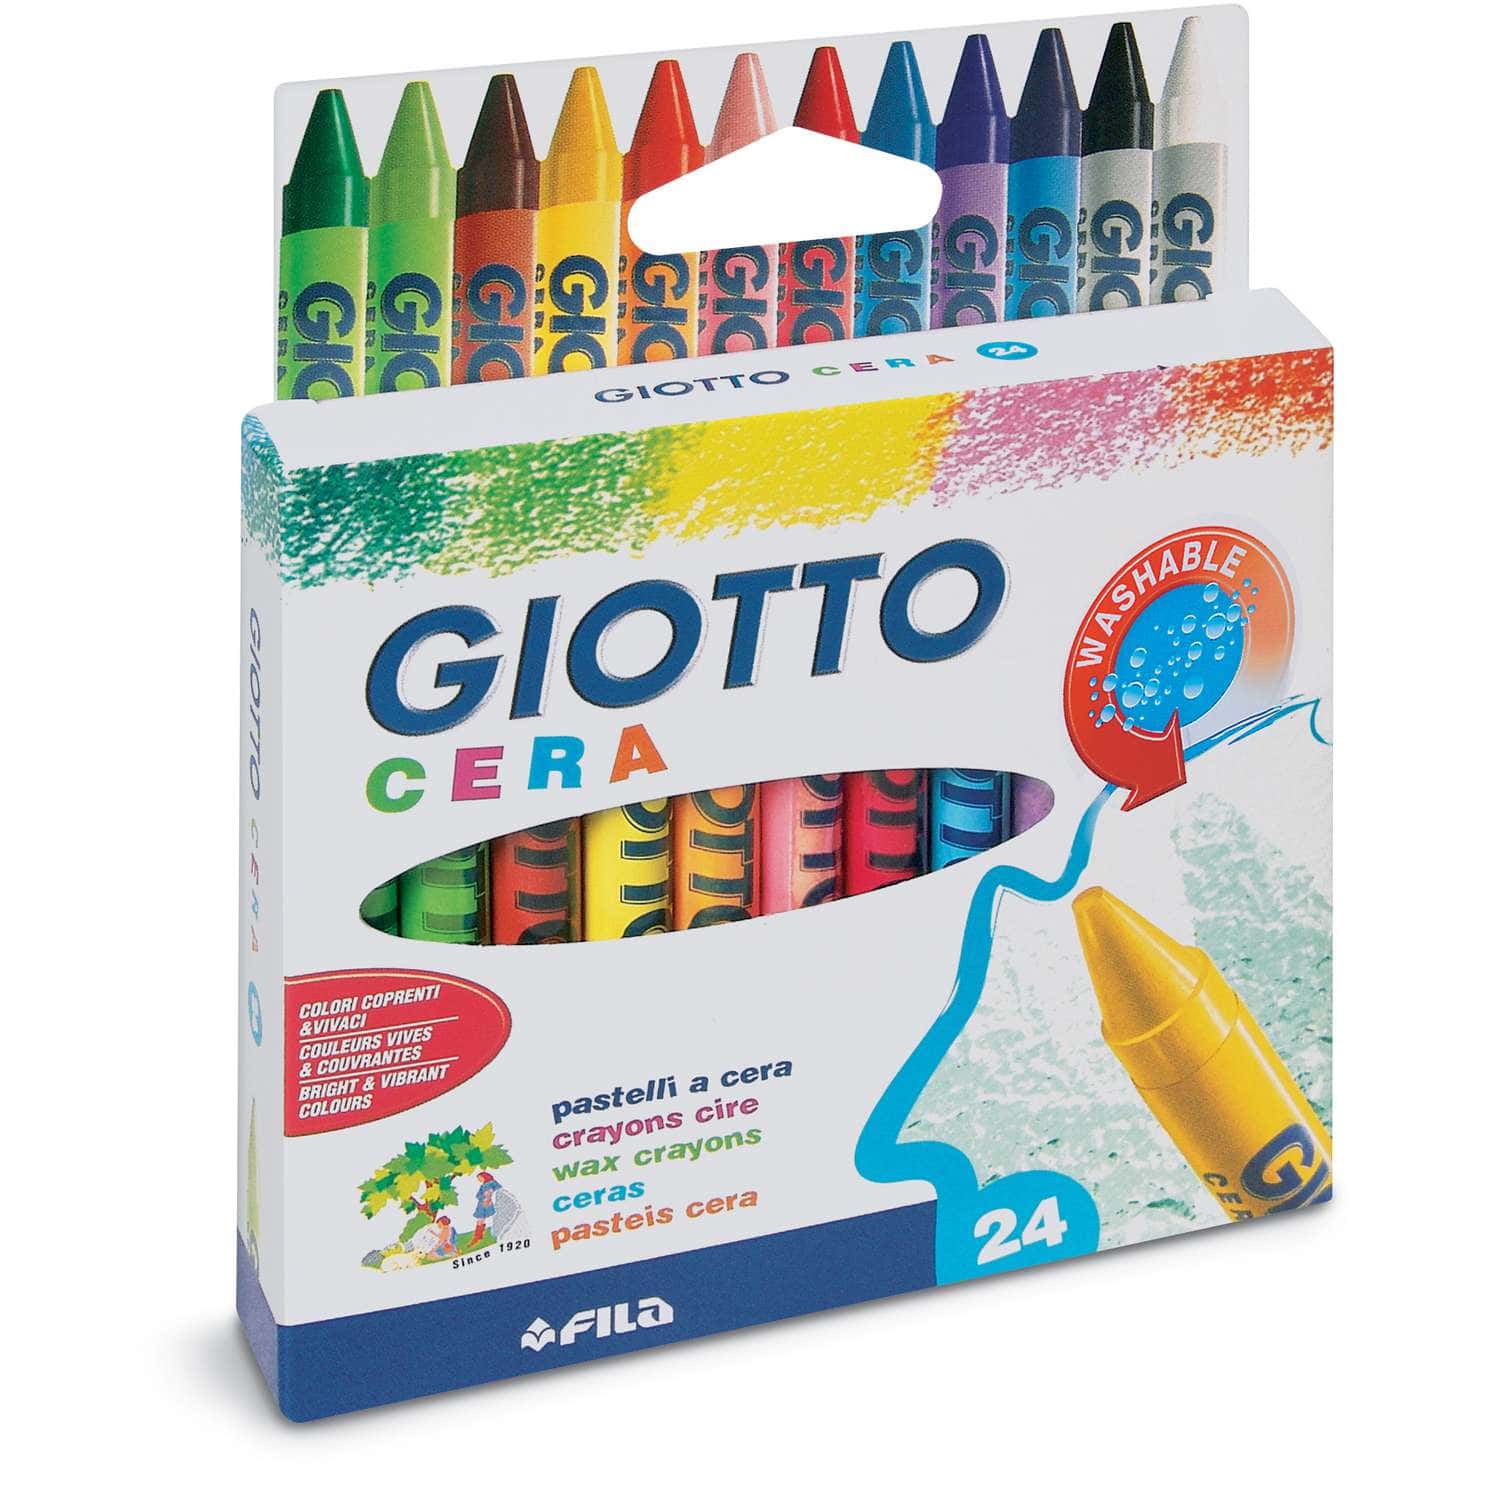 https://images.geant-beaux-arts.fr/out/pictures/generated/1500_1500/391602/Coffret+de+crayons+%C3%A0+la+cire+Cera+Giotto%2C+24+crayons.jpg